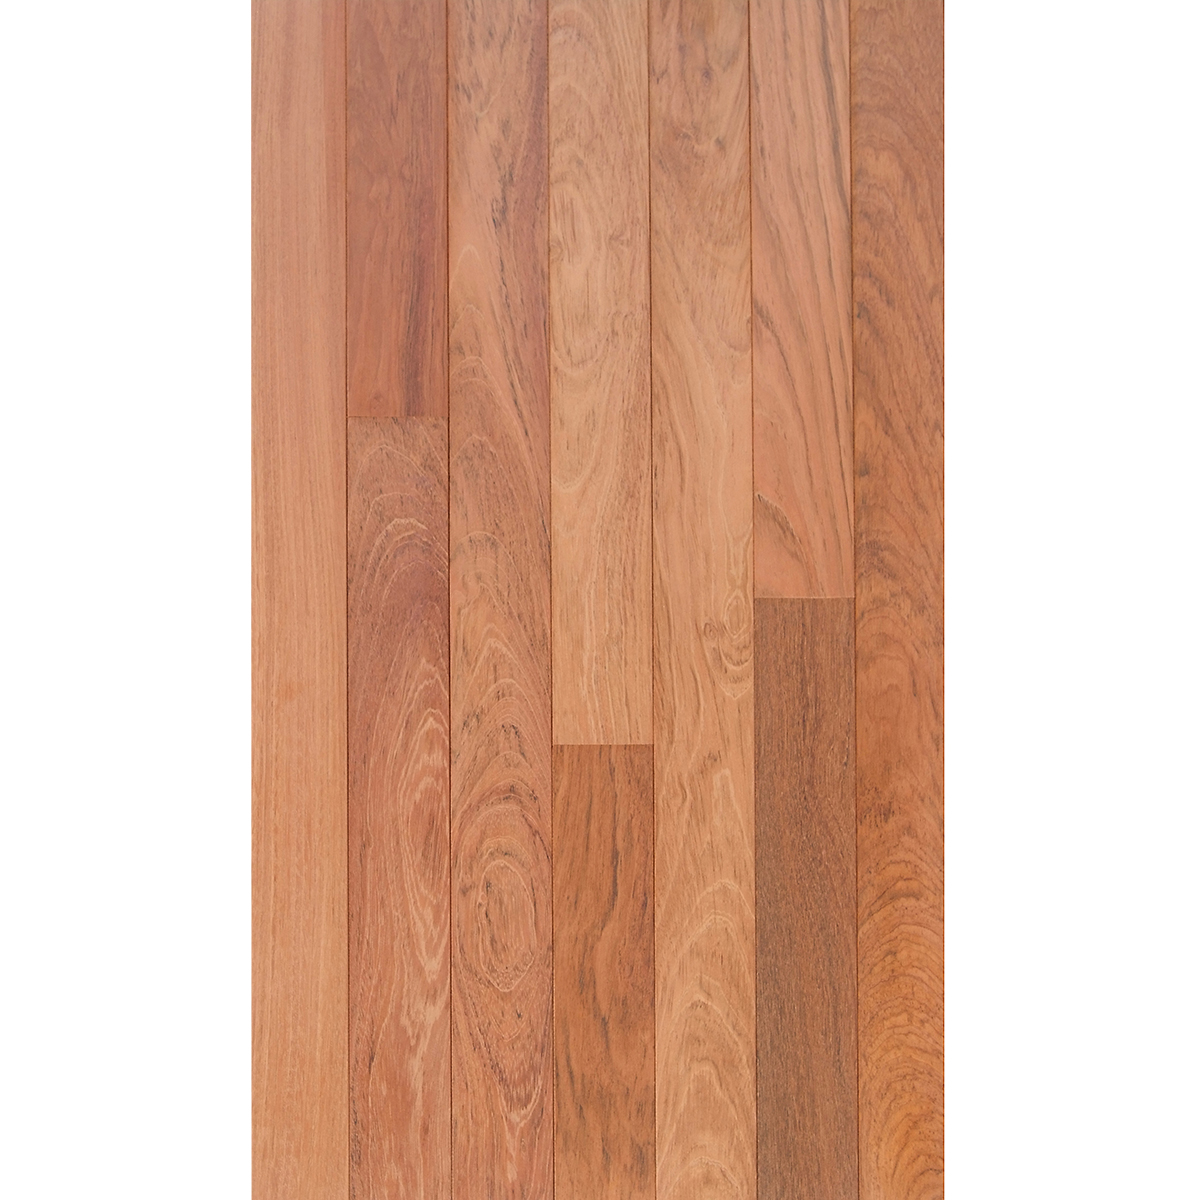 Brazilian Cherry 3 4 X Select Grade, How Much Is Cherry Hardwood Flooring Per Square Foot